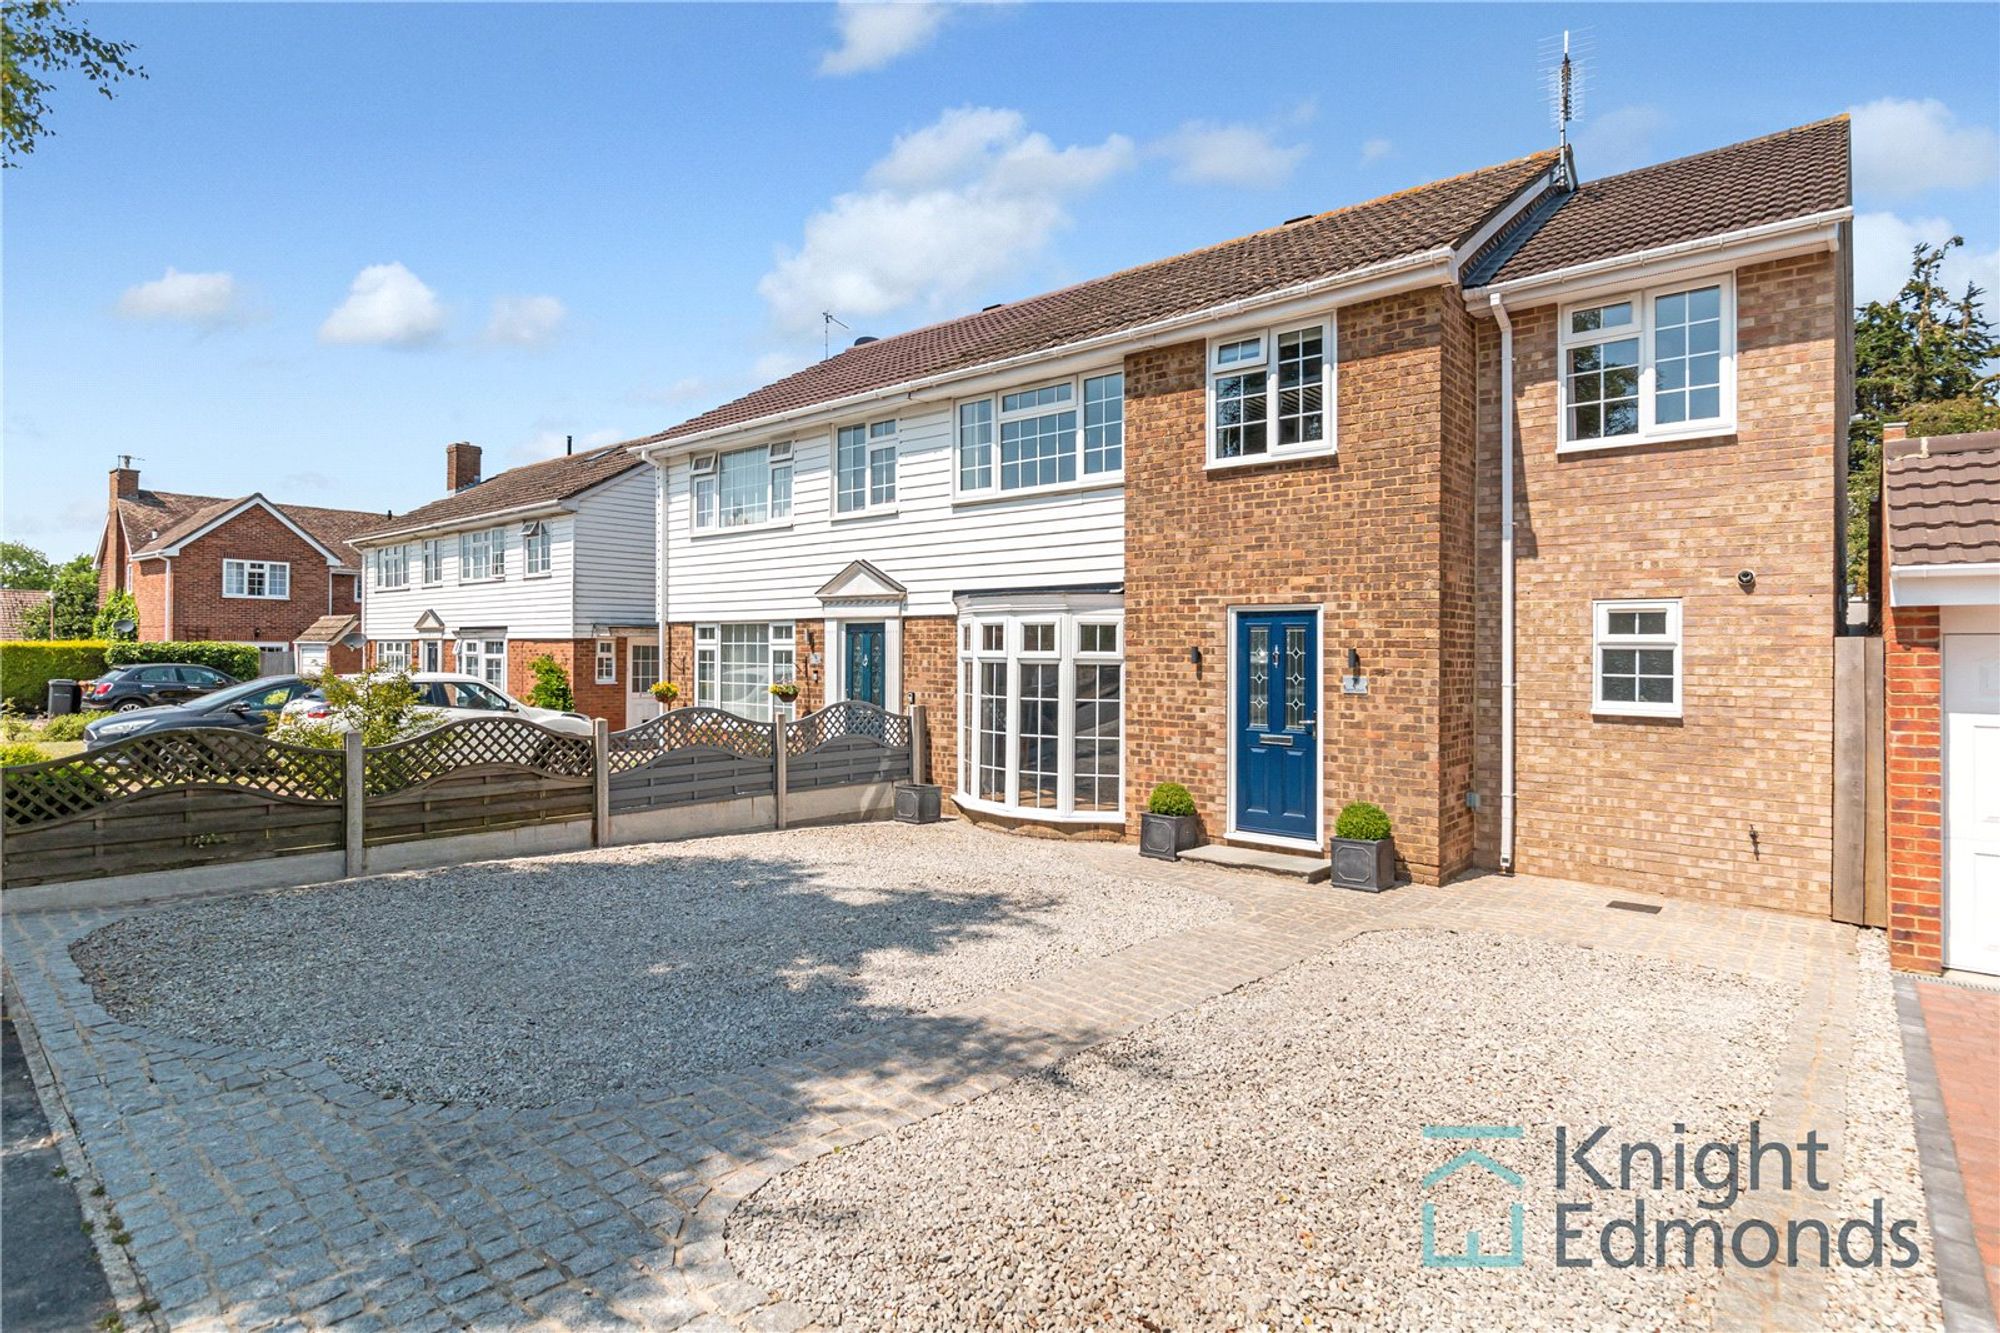 4 bed semi-detached house for sale in Dane Court, Maidstone - Property Image 1